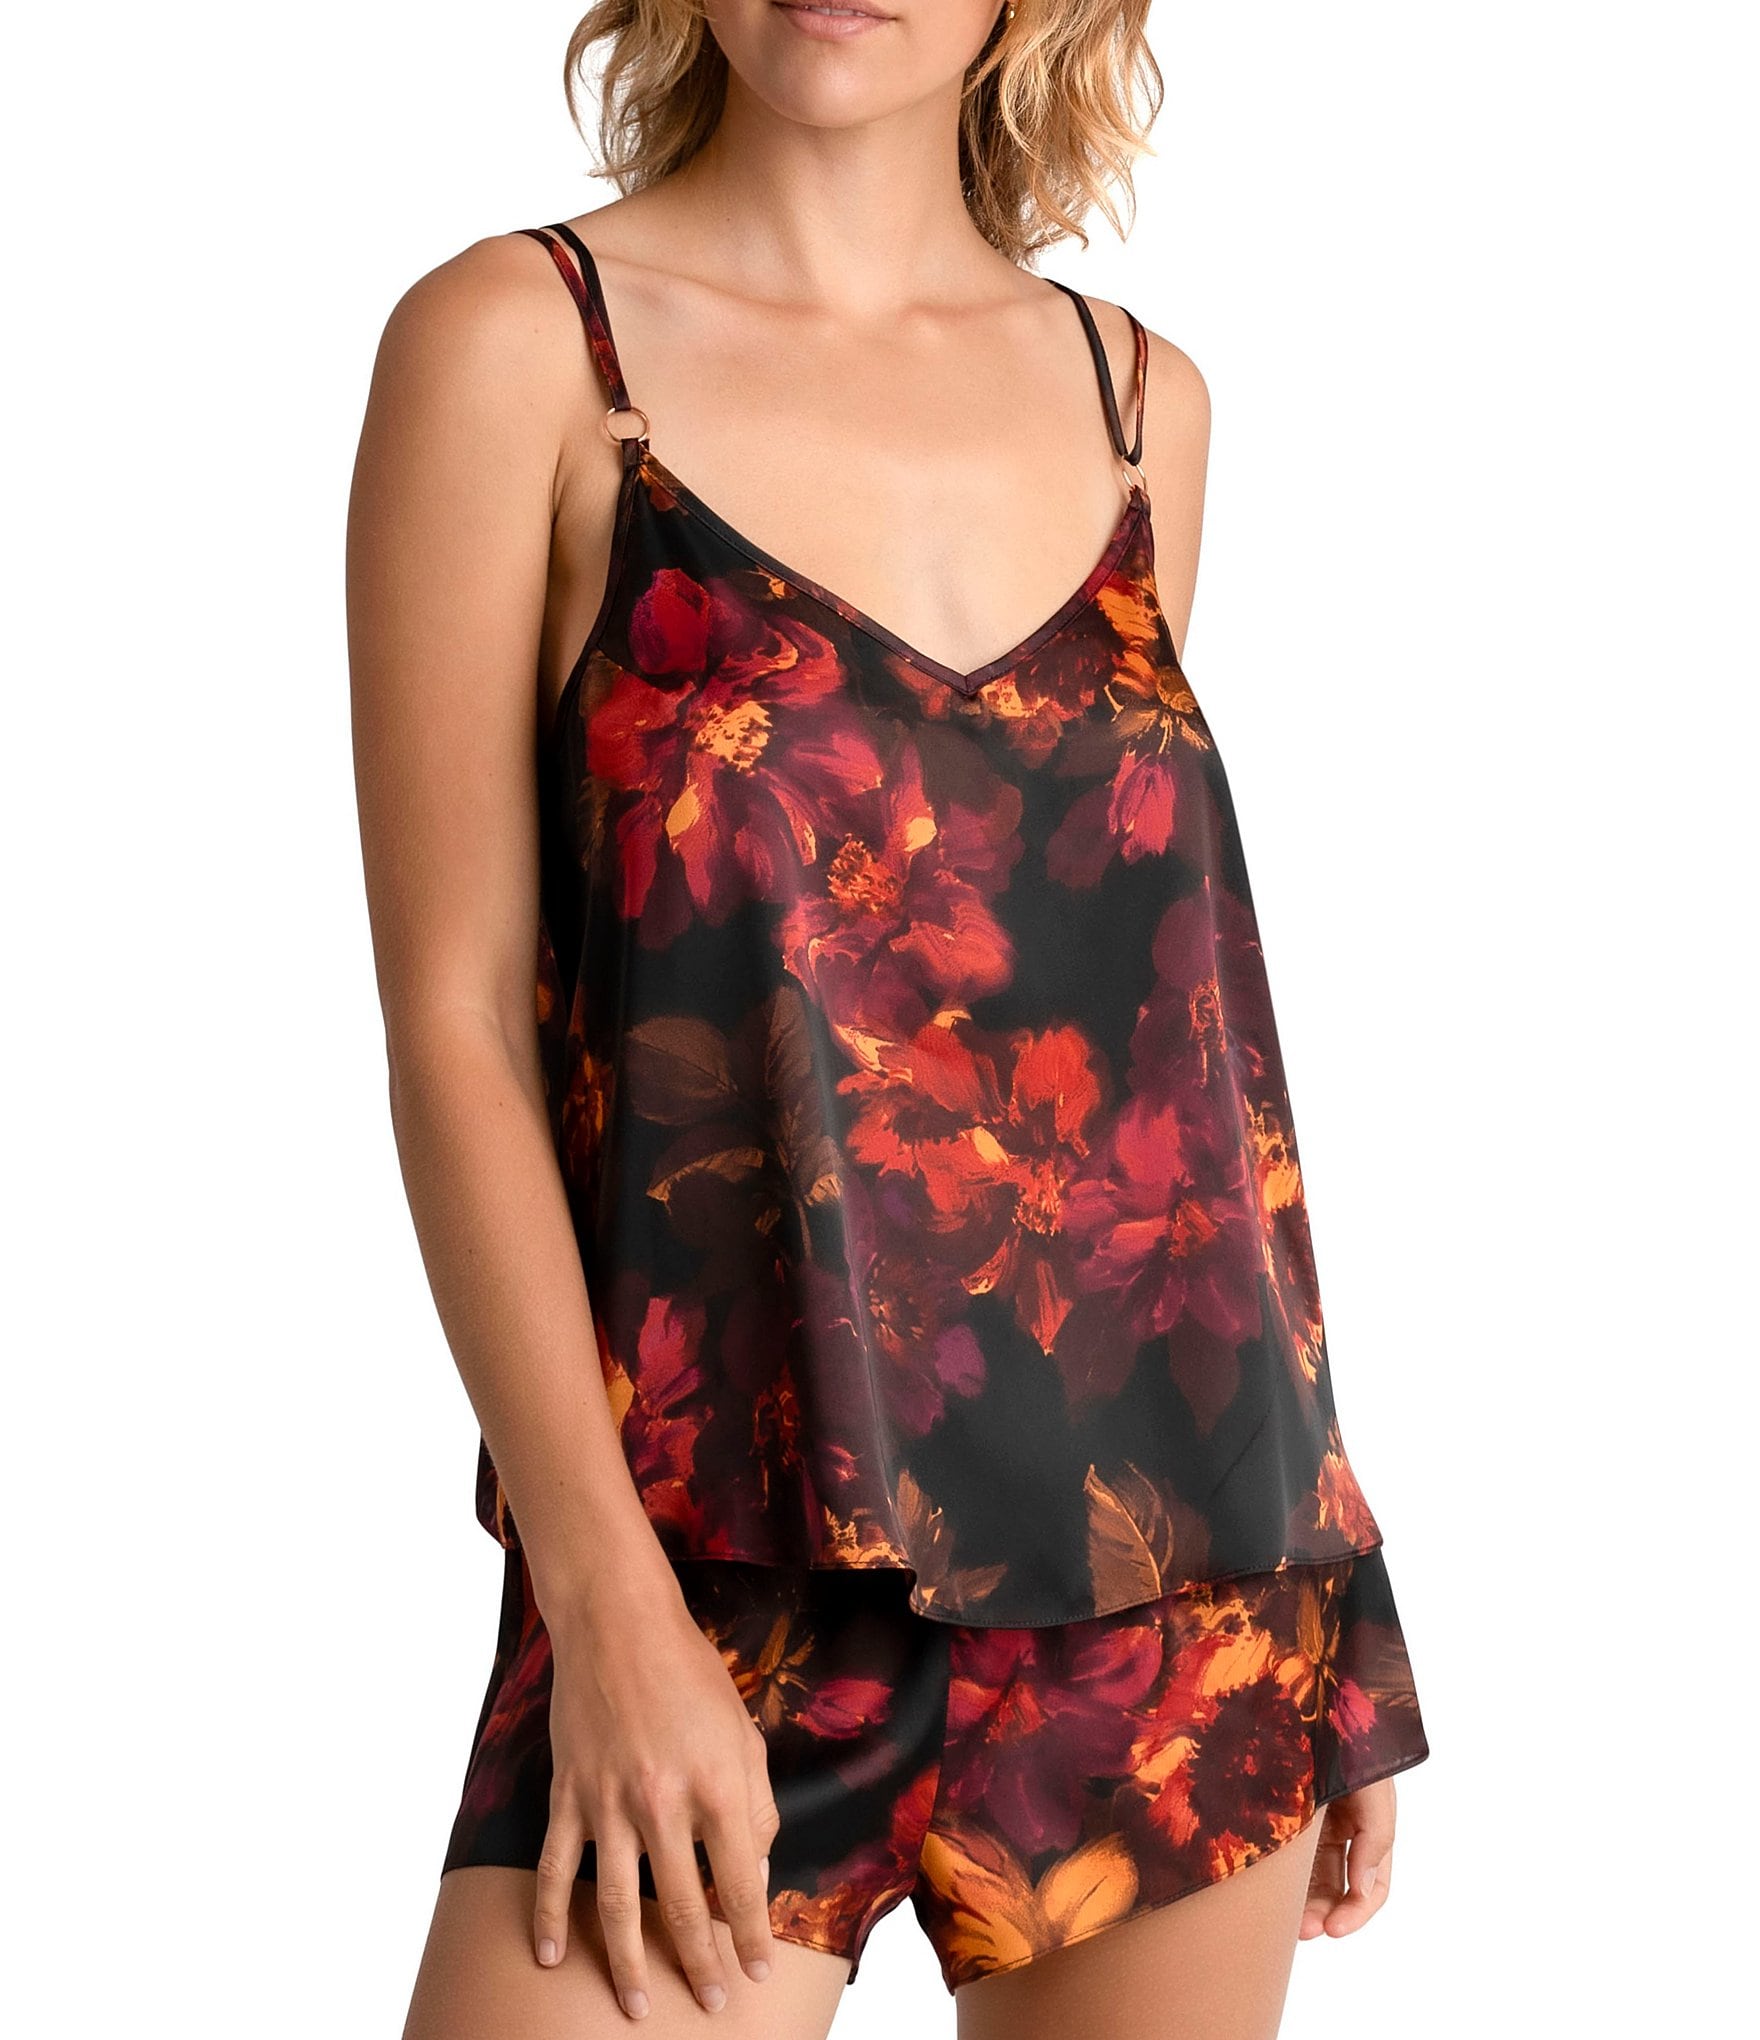 In Bloom by Jonquil Textured Satin Sleeveless Lace V-Neck Cami